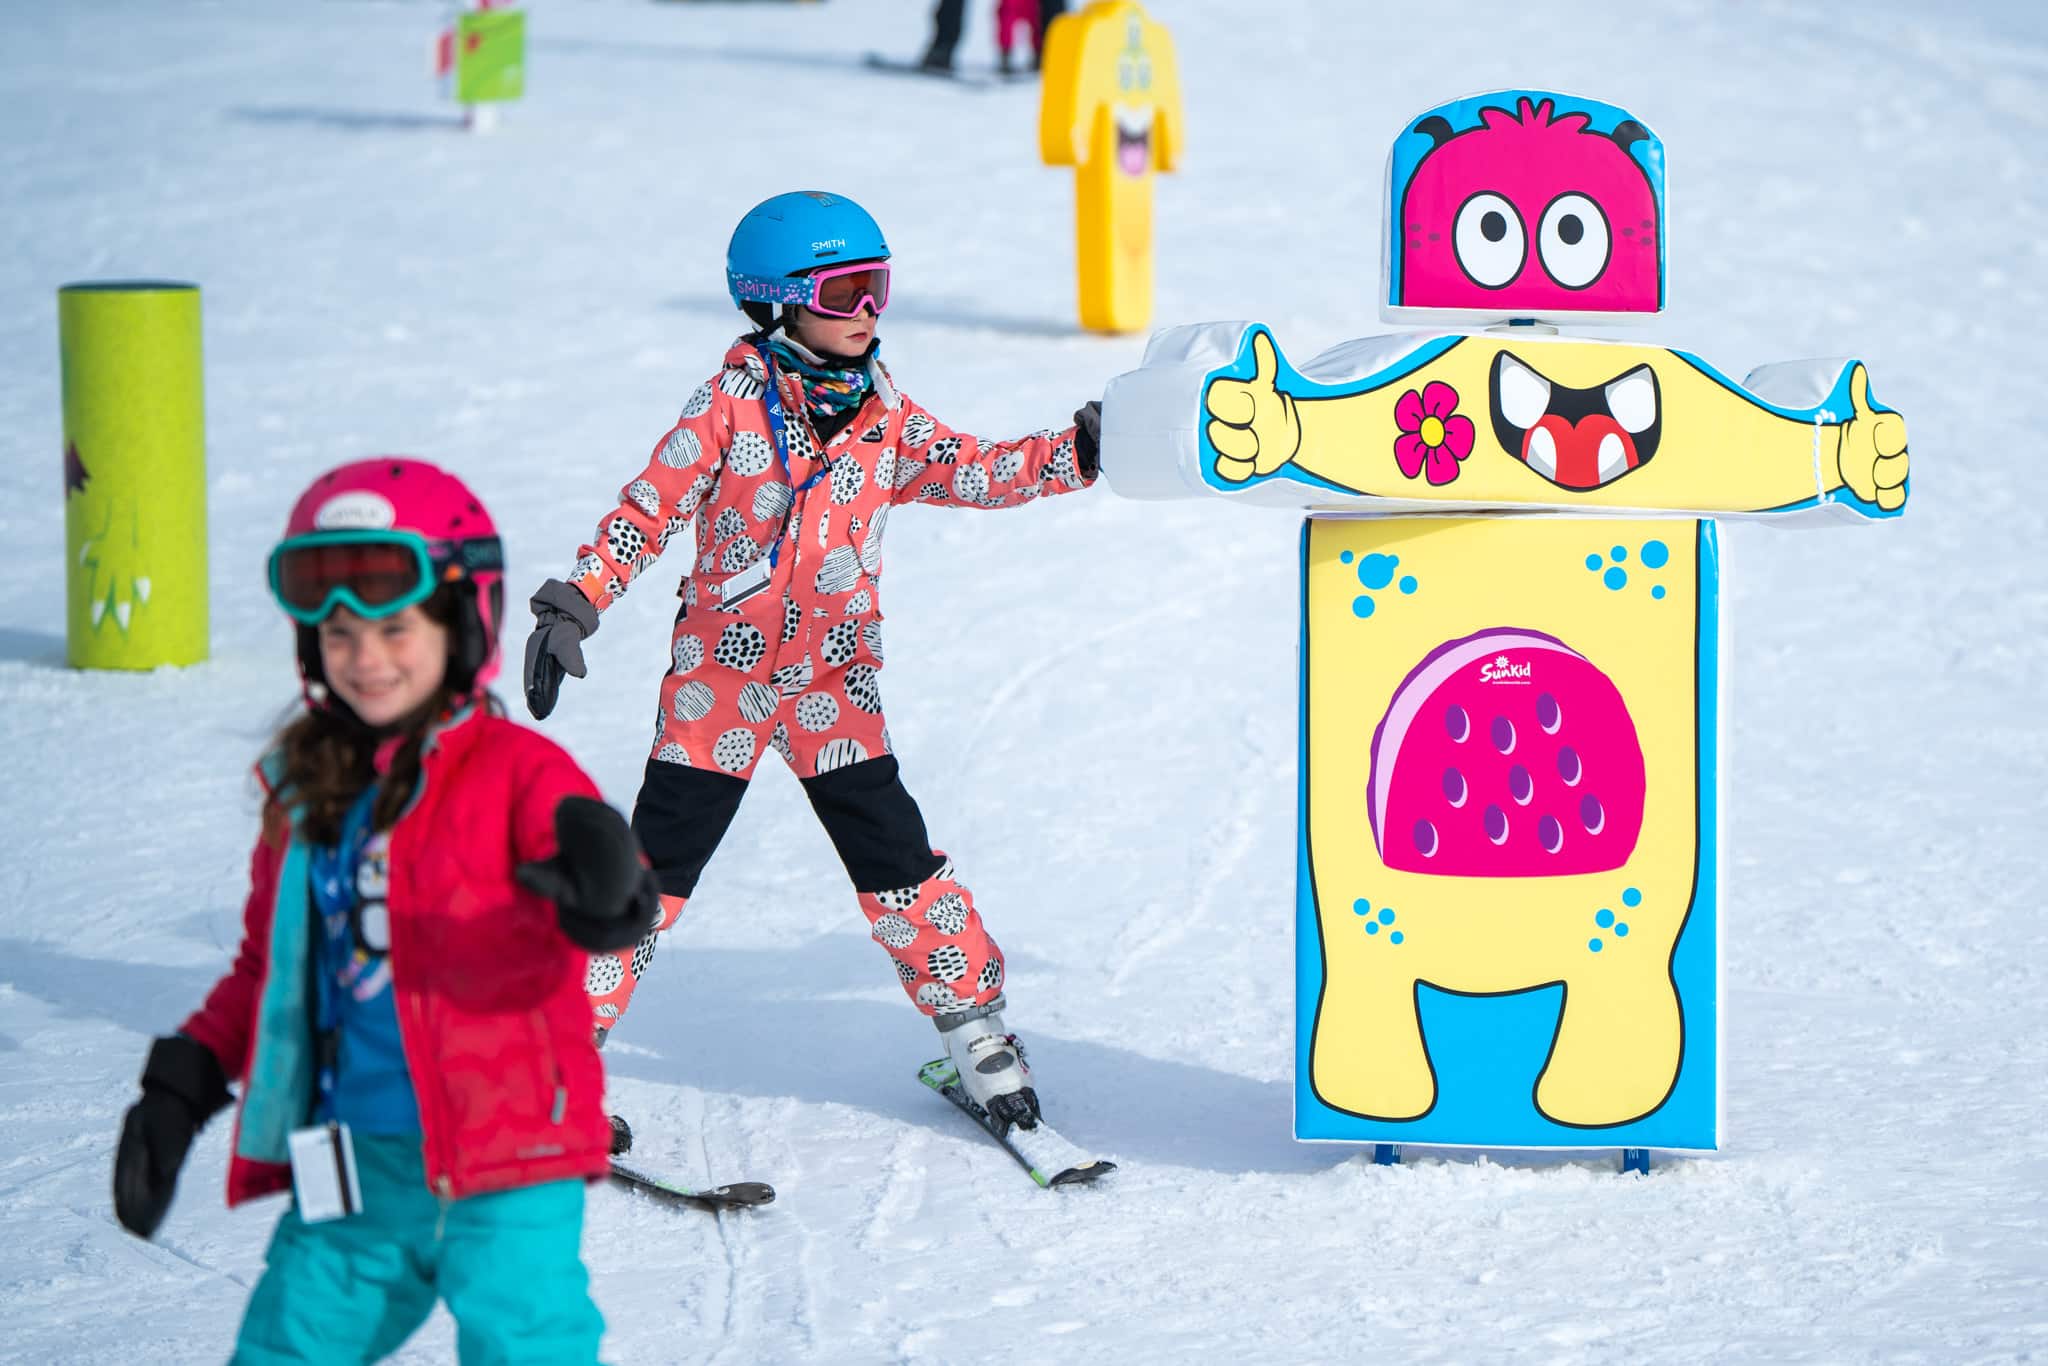 Two young skiers navigating an obstacle course with joy.